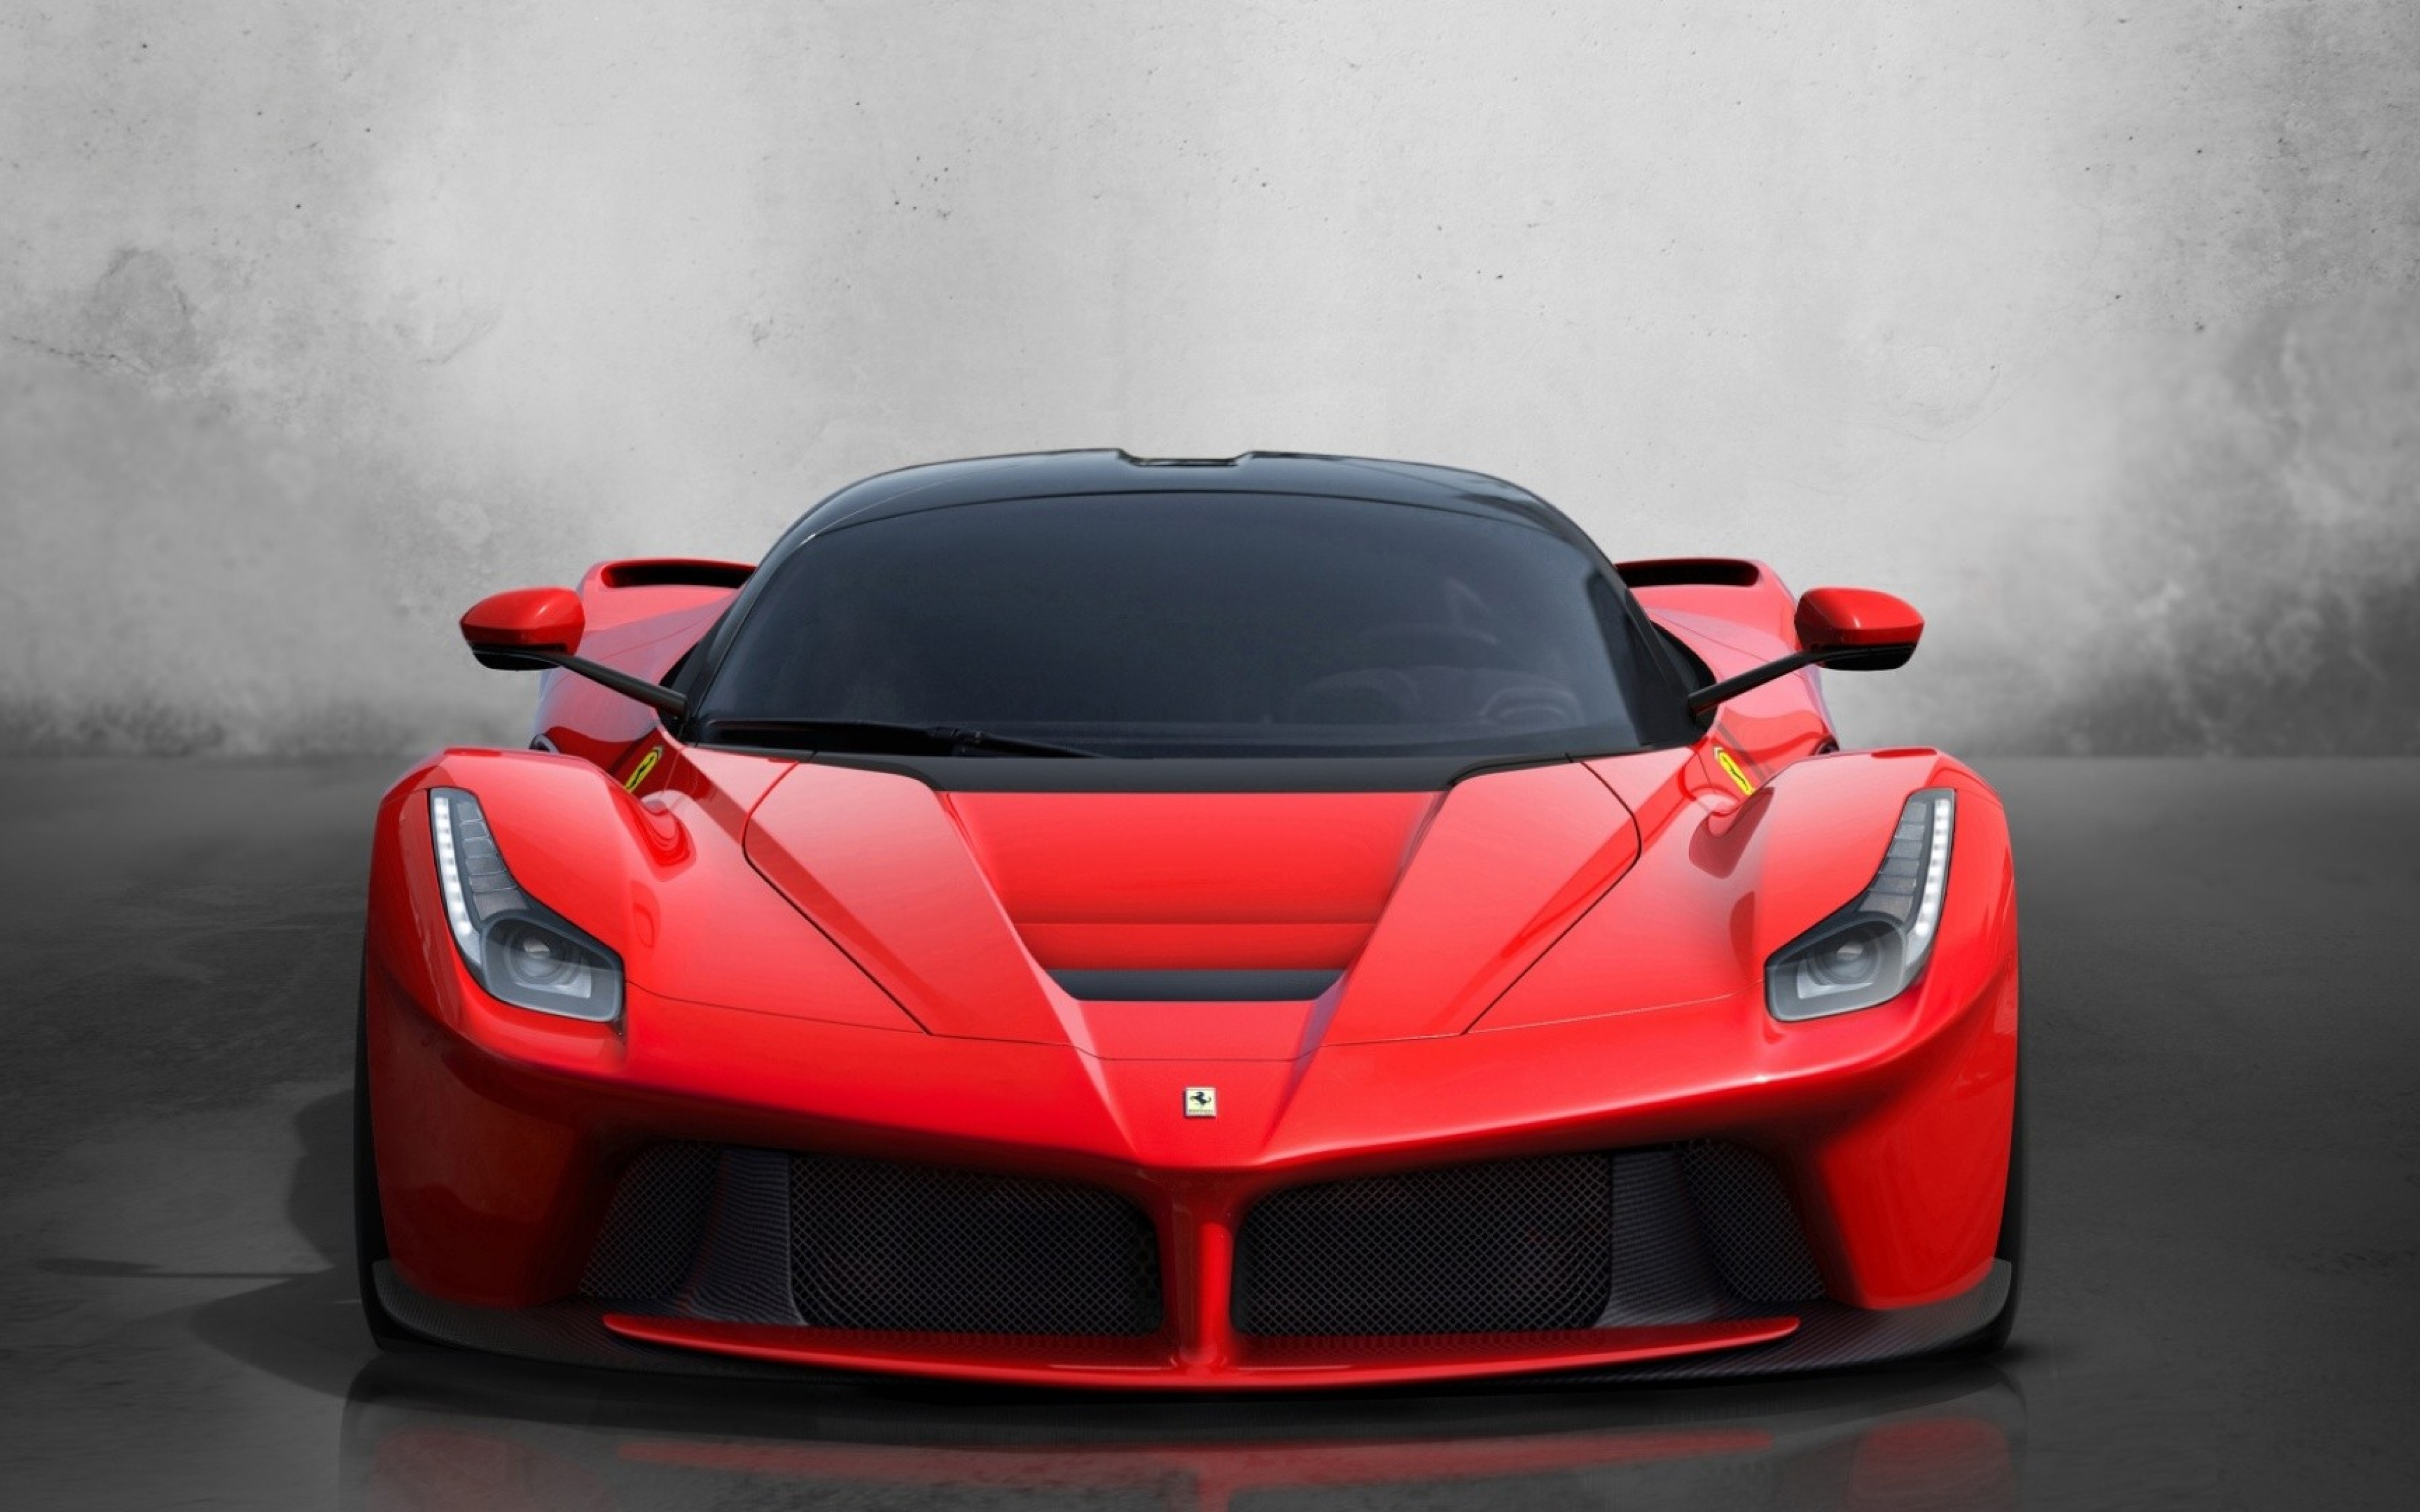 Ferrari Wallpapers and Background Images   stmednet 3840x2400